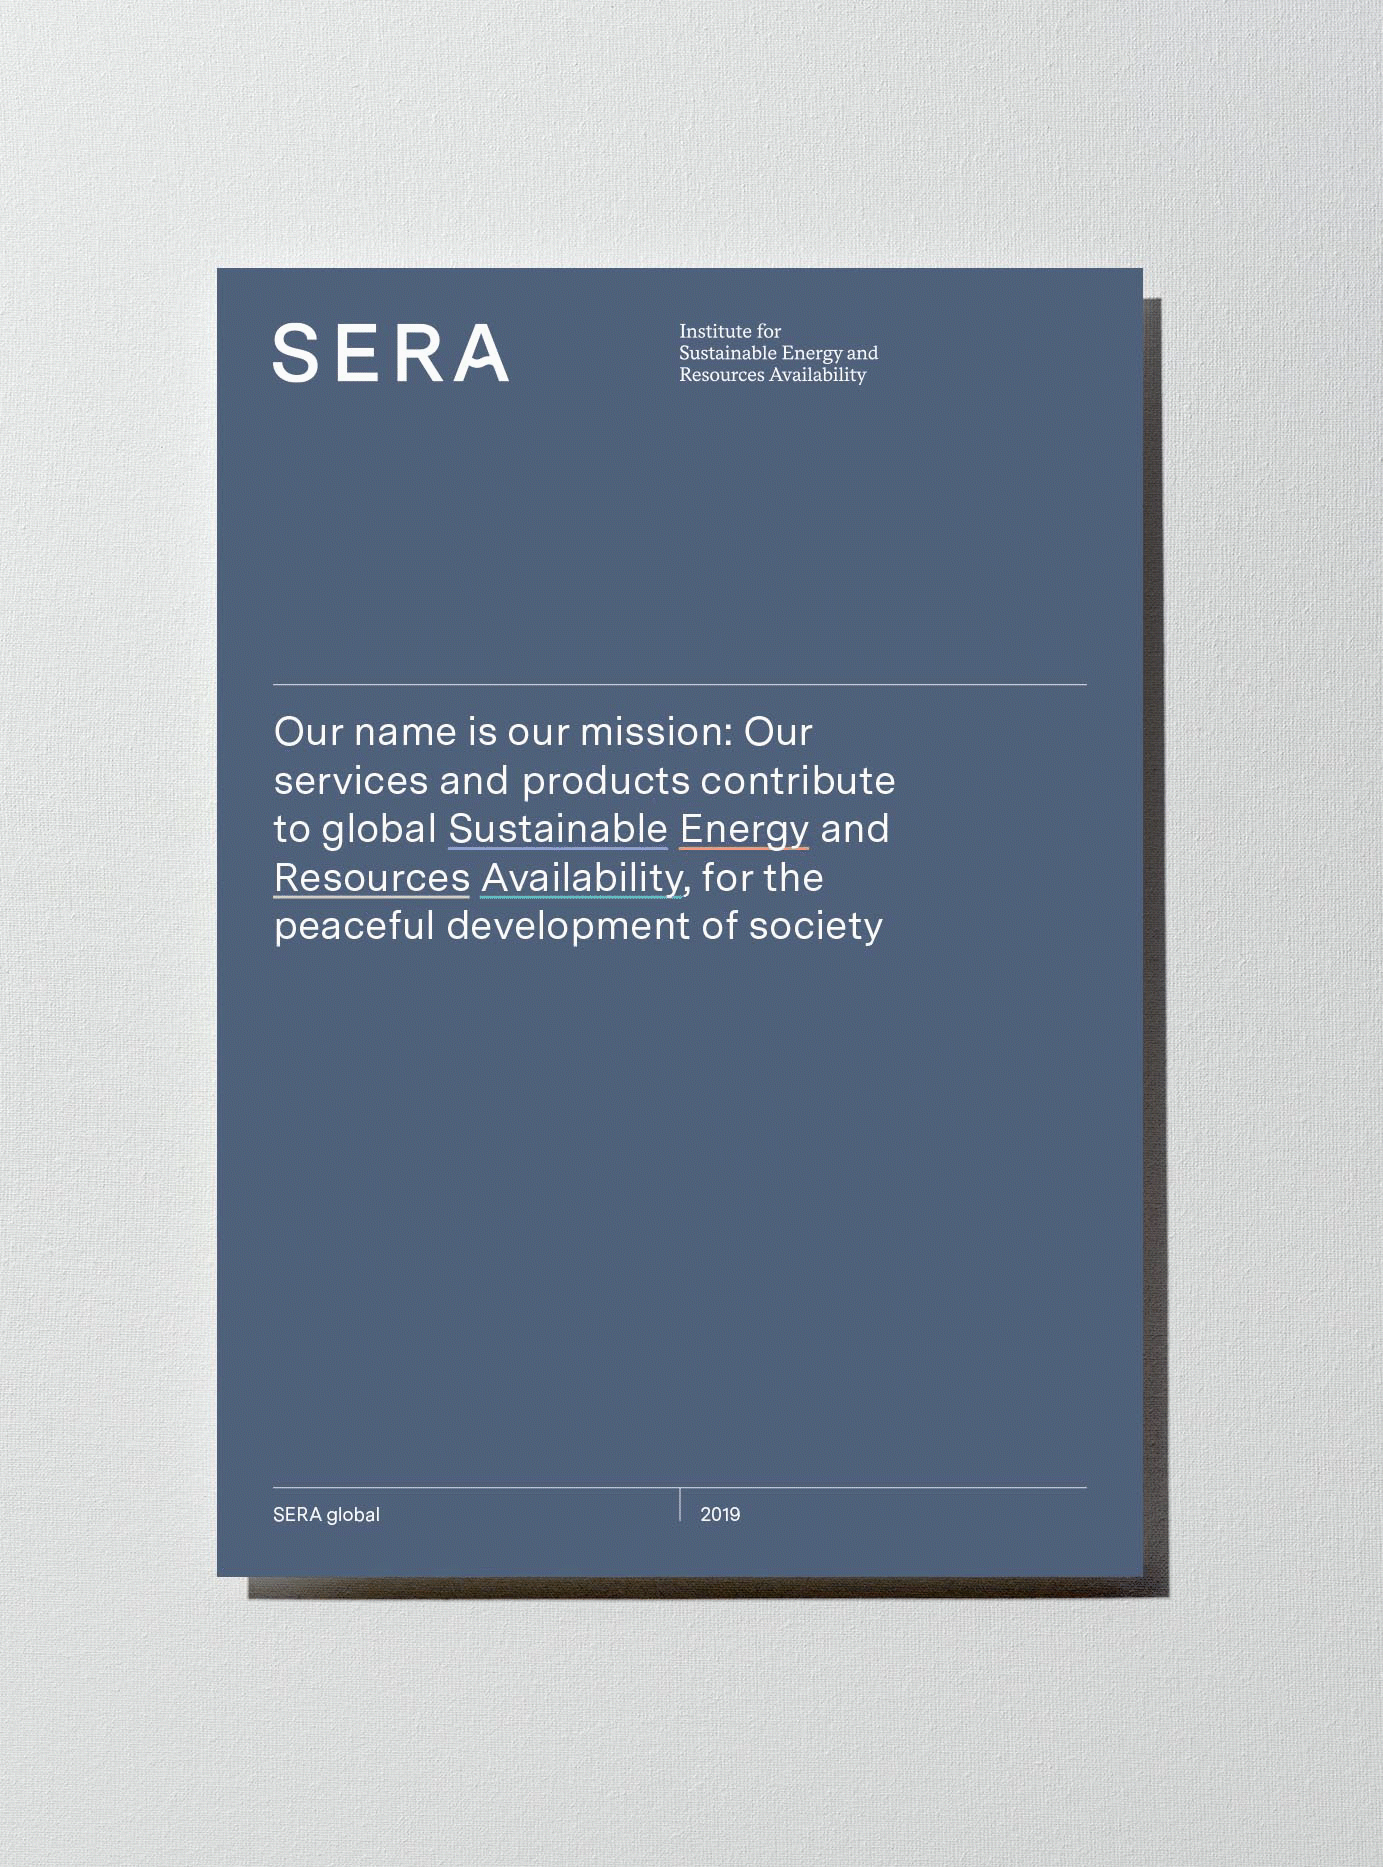 SERA branding by Acute, a Vienna-based creative practice founded by Isabella Thaller.